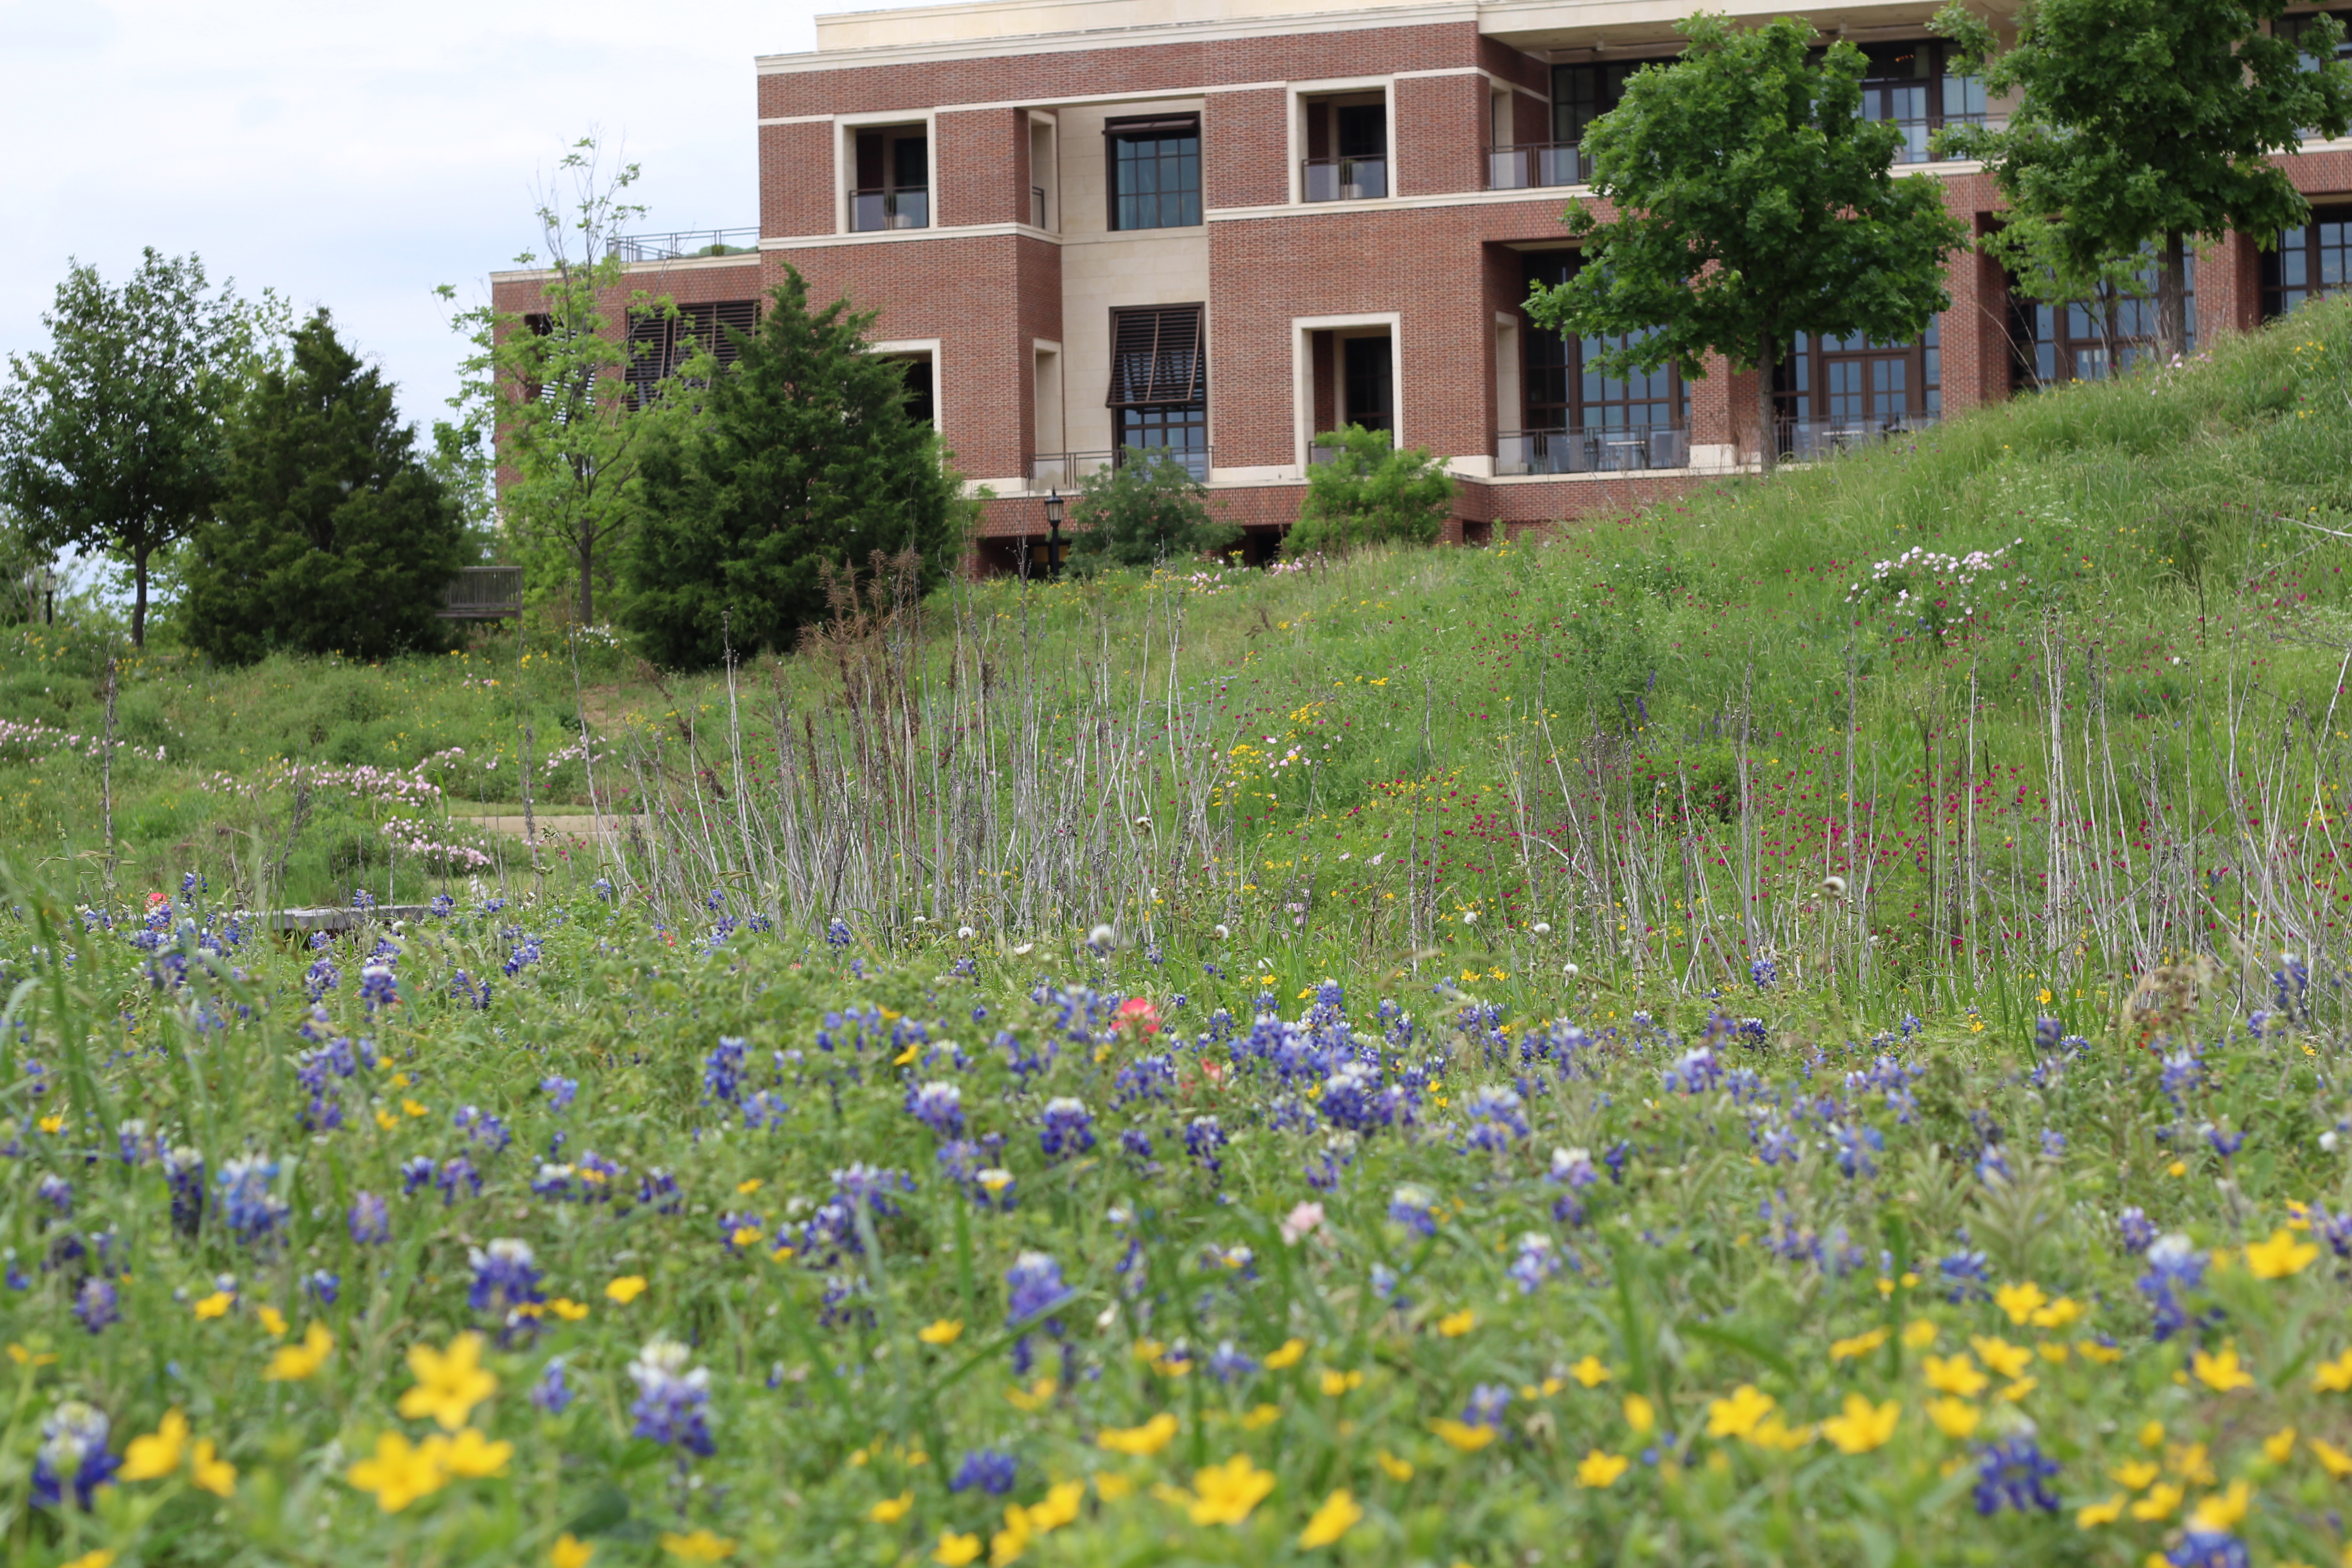 A picture of bluebonnets in front of the George W Bush Library and Museum